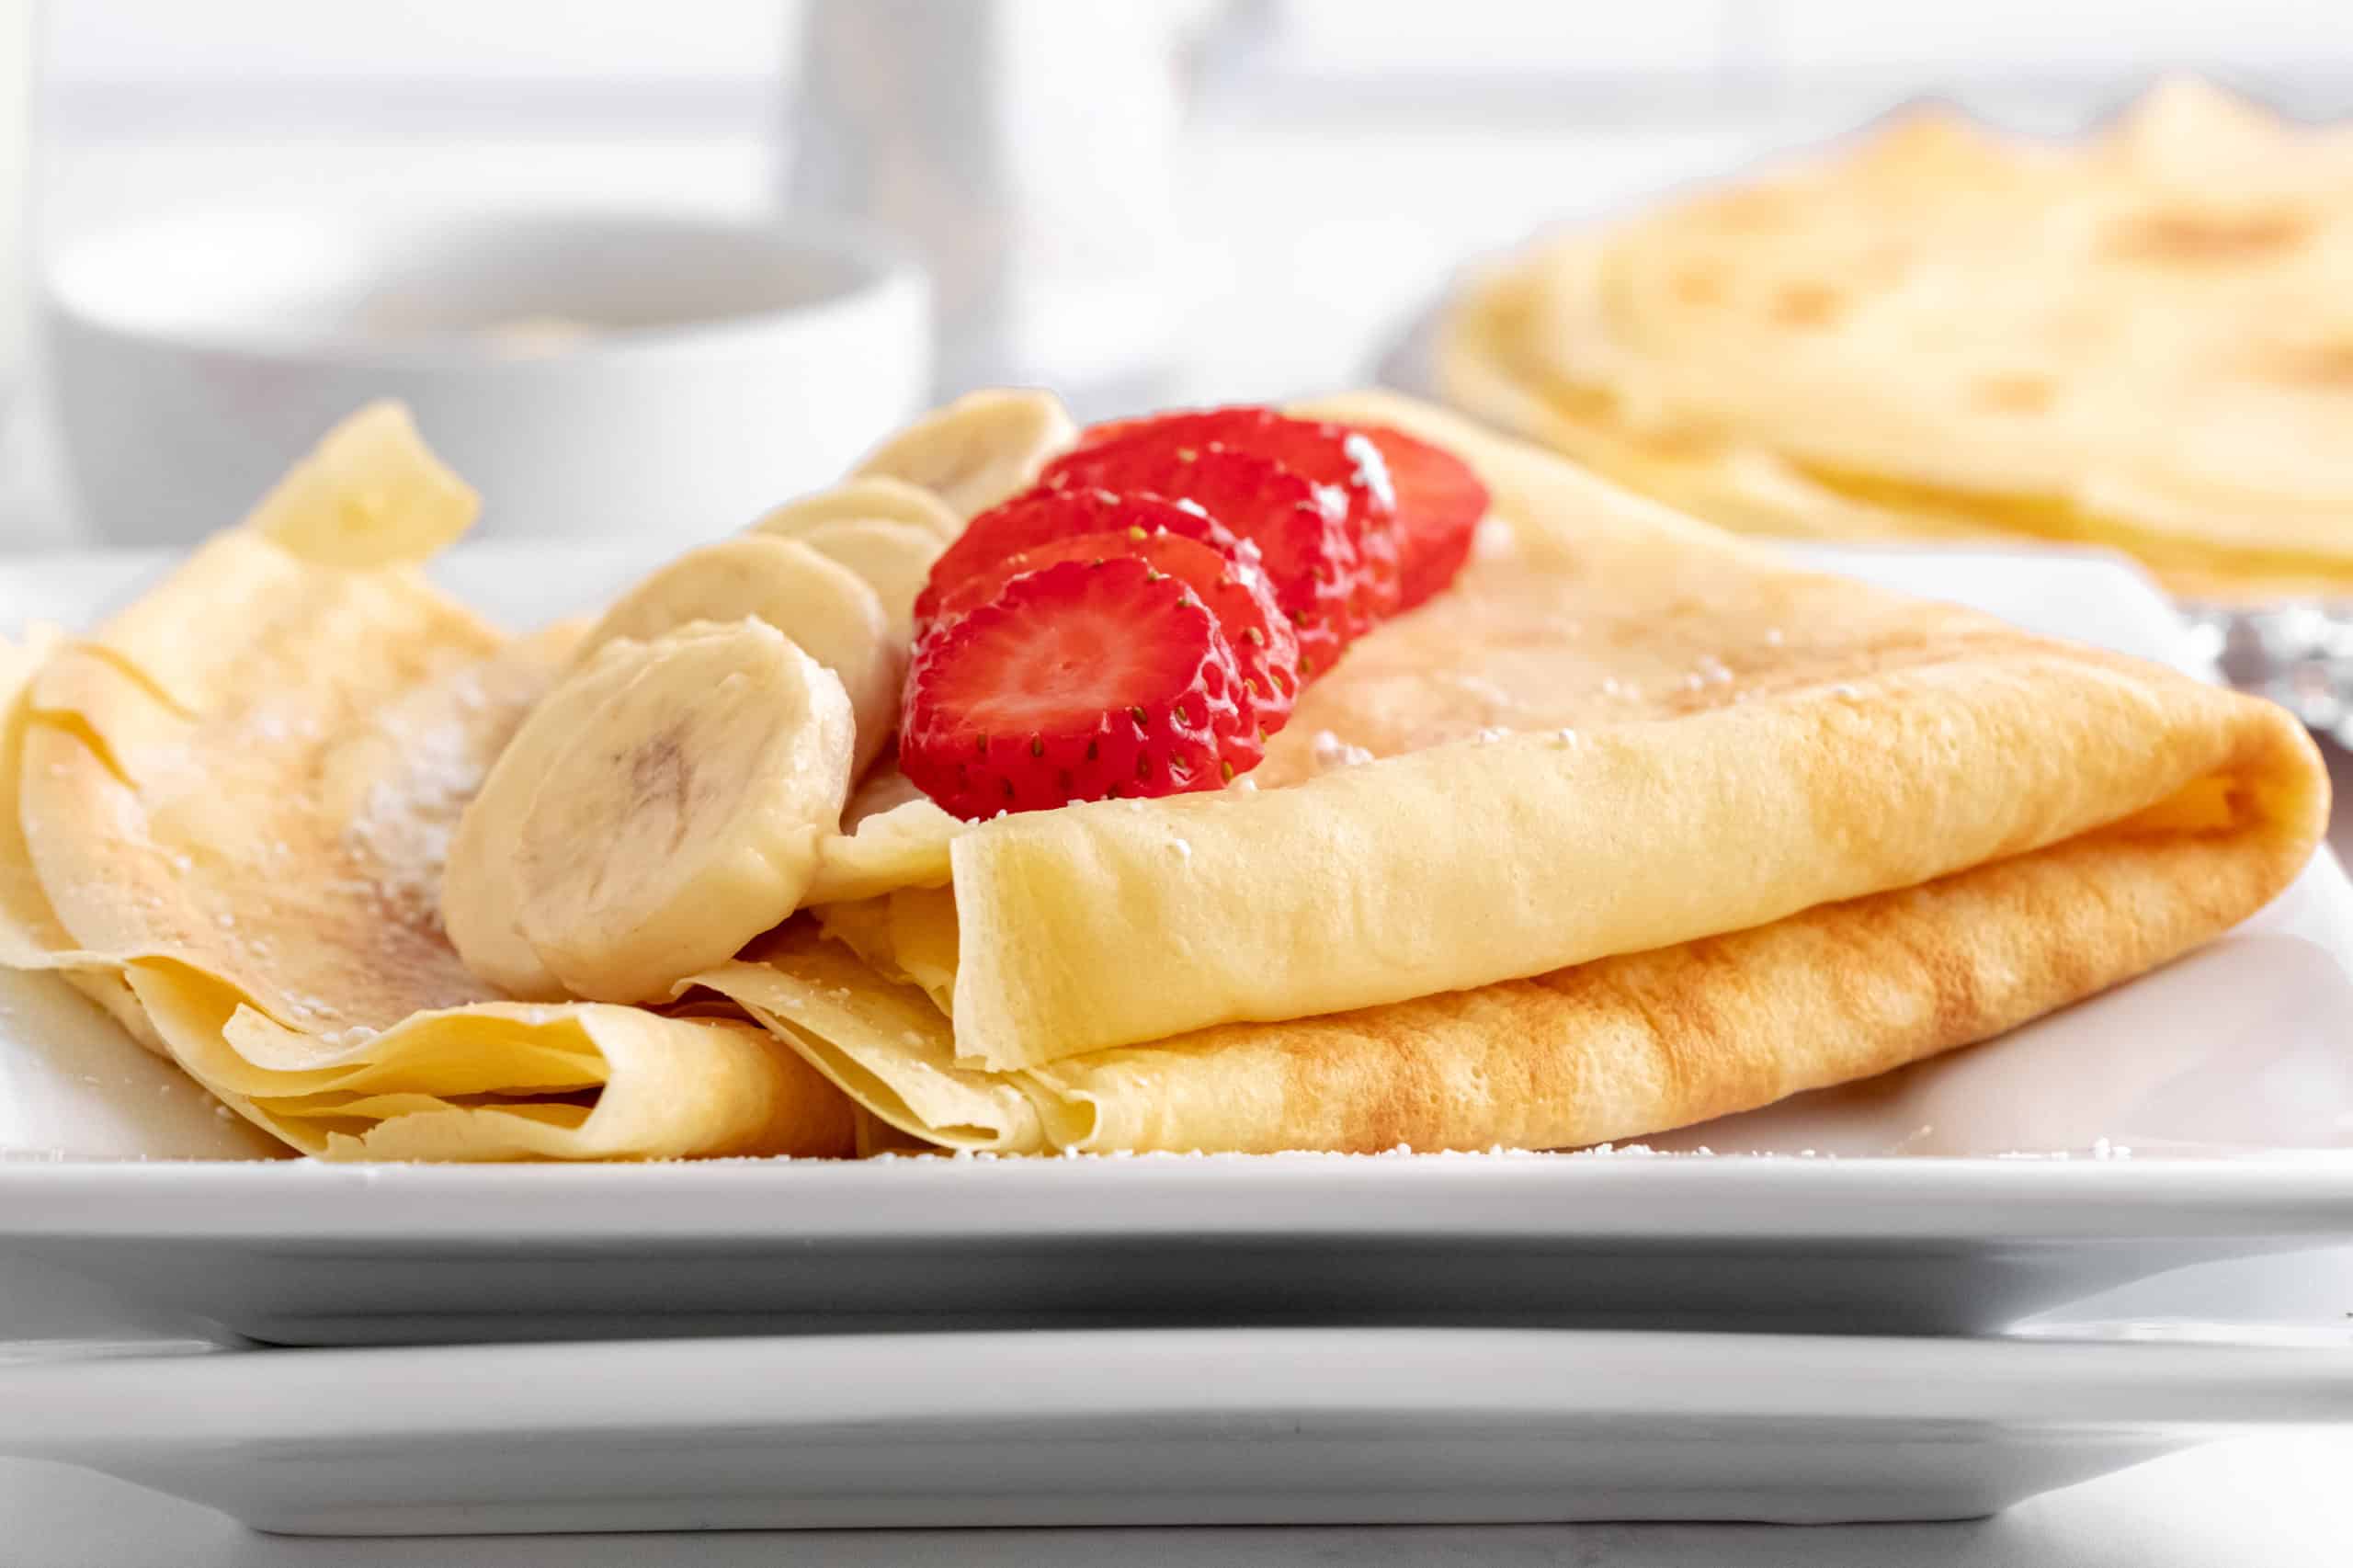 Low angle shot of a crepe folded up on a white plate with sliced banana and strawberry on top.